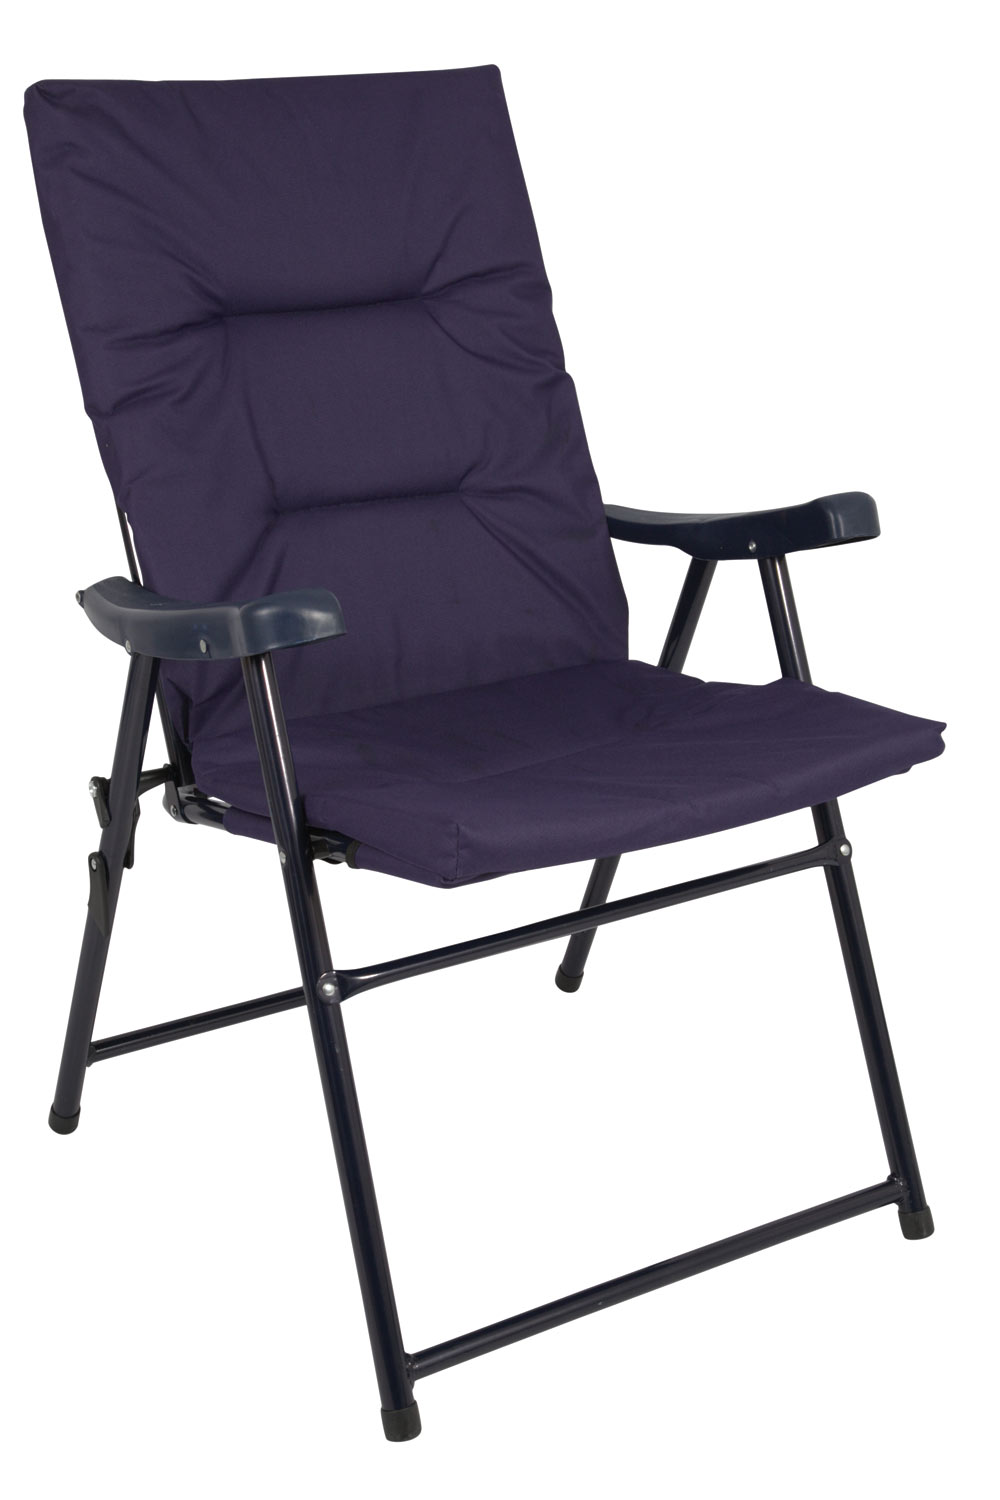 Low Camping Chair